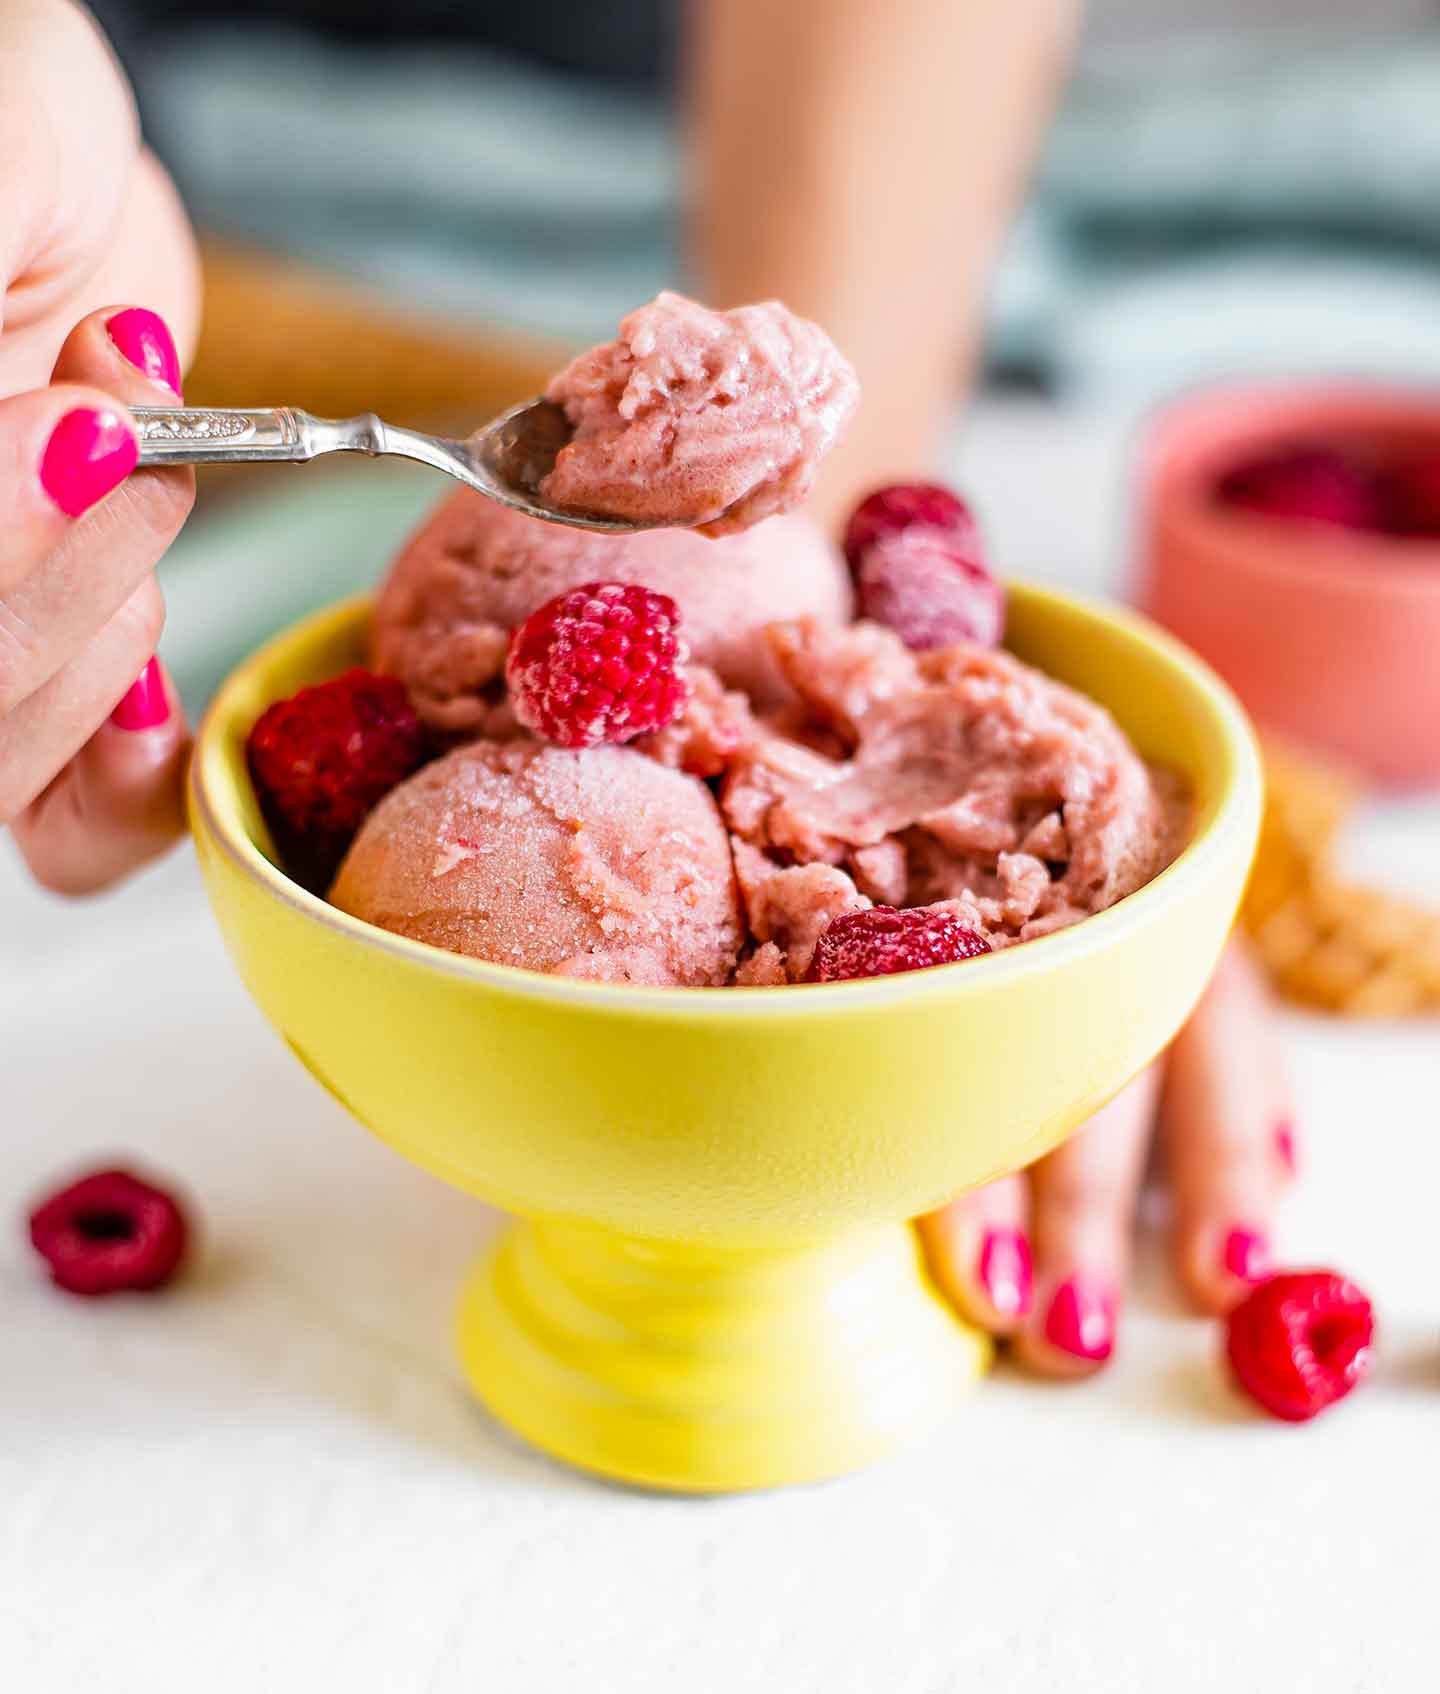 Side view of hand scooping raspberry nice cream on a small spoon from a sorbet cup. The nice cream is bright pink and creamy.